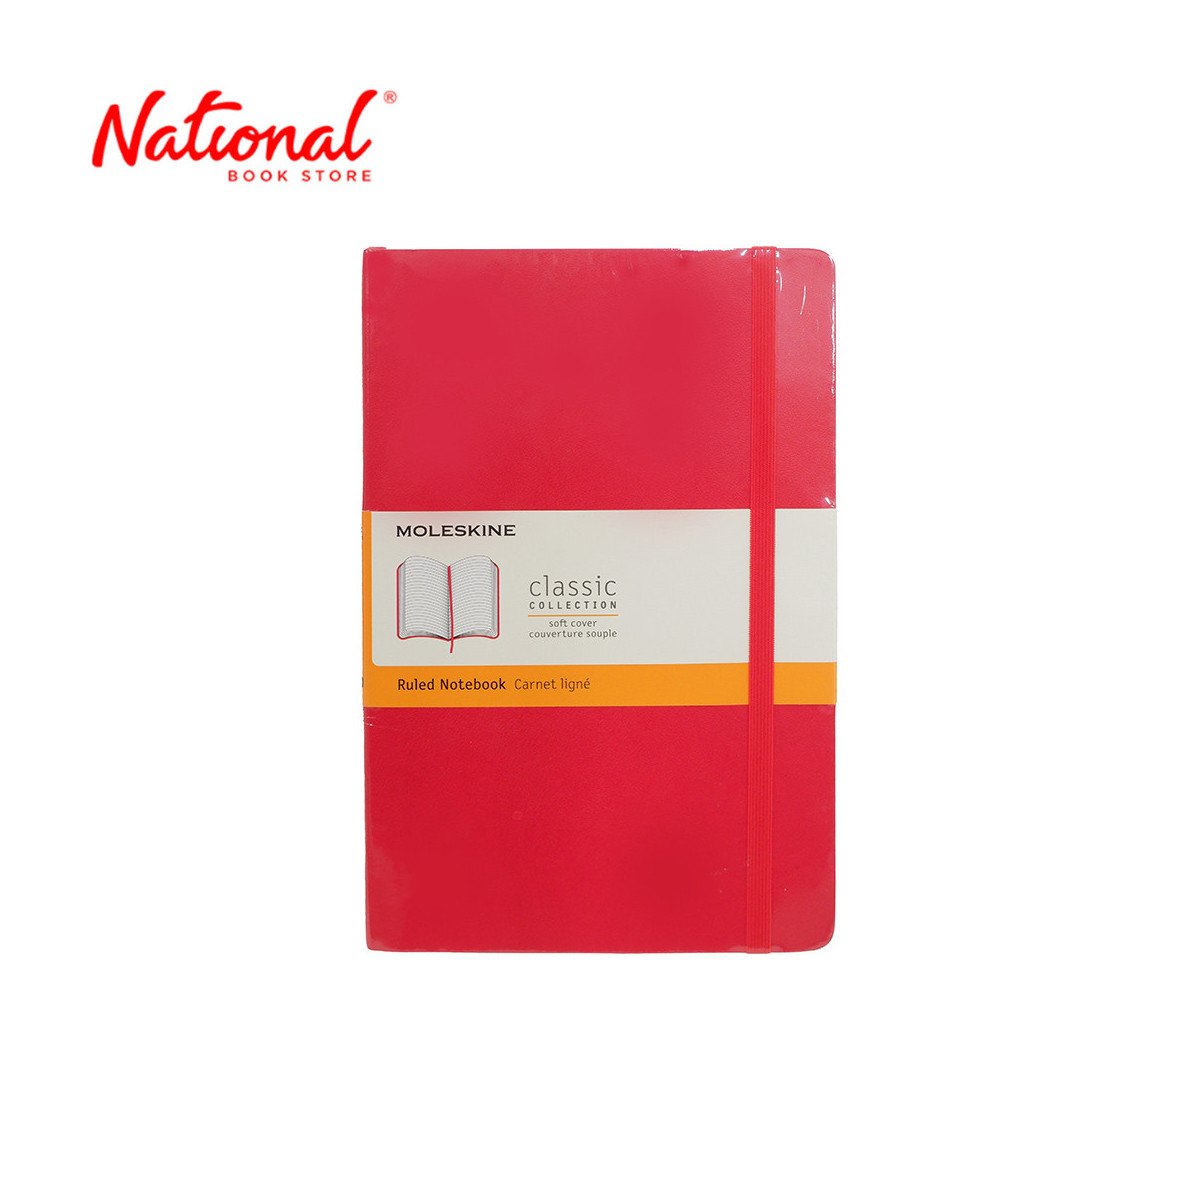 Moleskine Classic Notebook Ruled Softcover Large 120 Leaves Scarlet Red - School Supplies